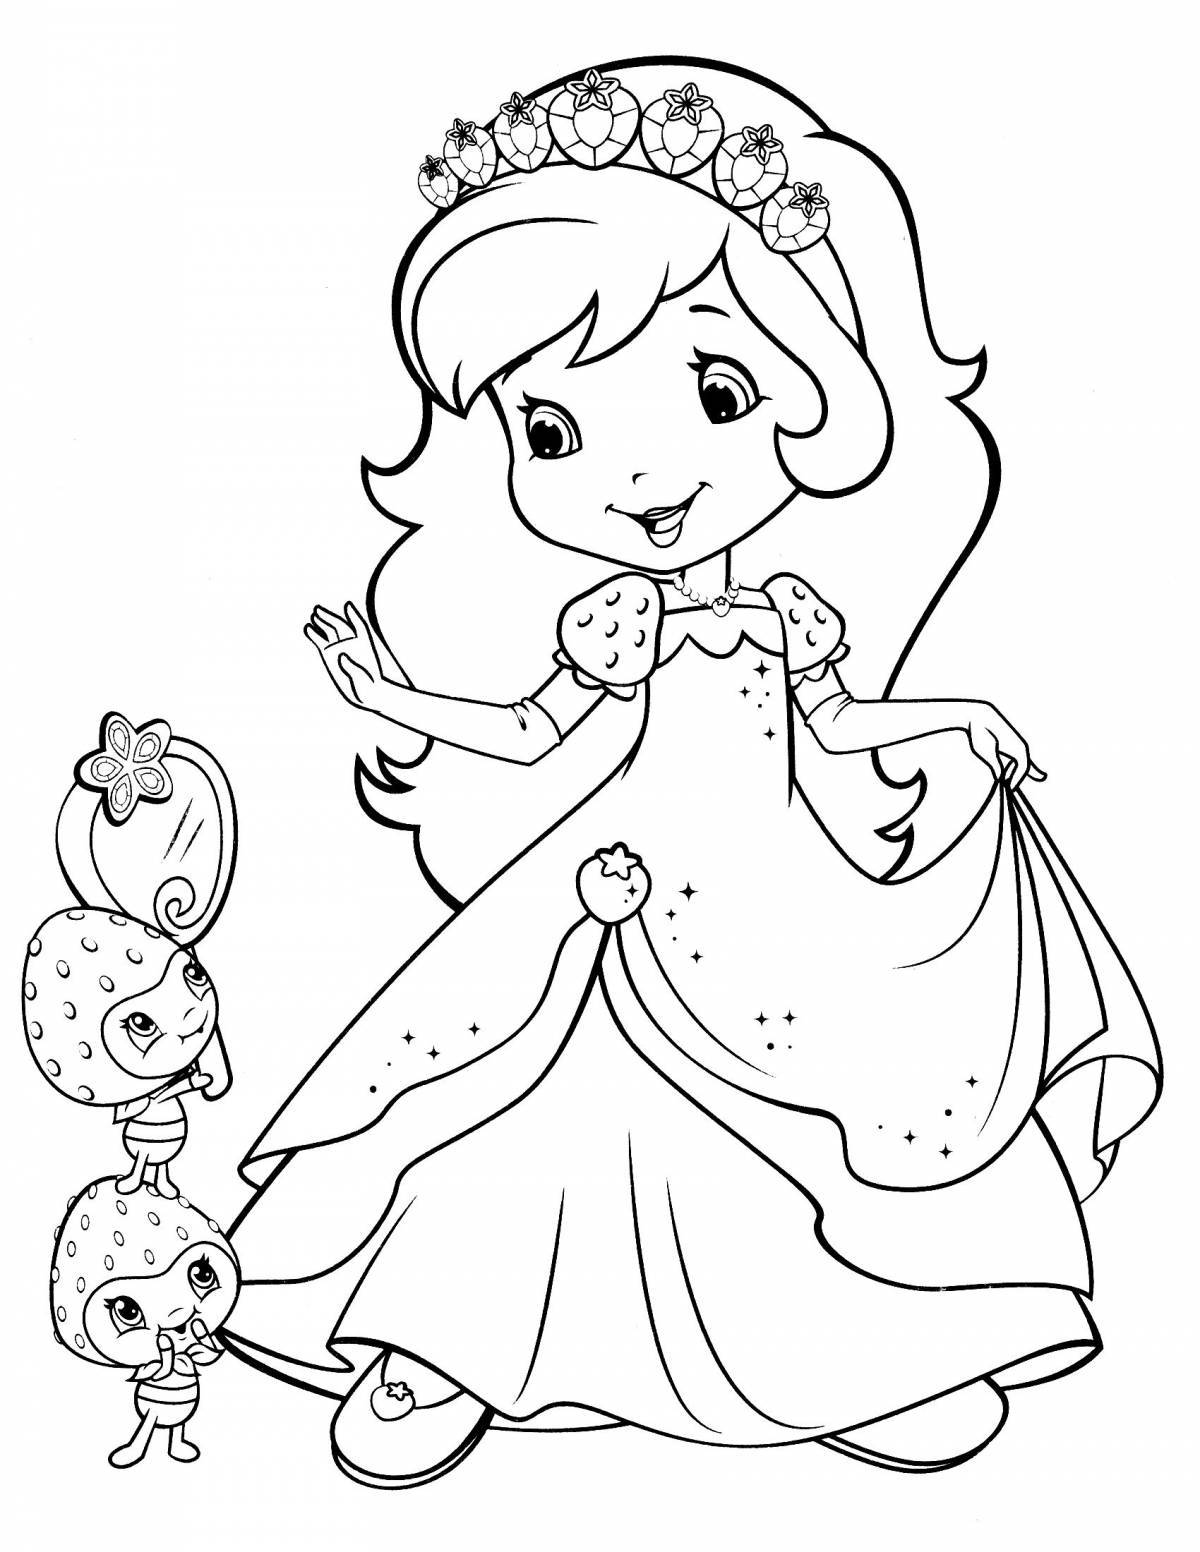 Luminous coloring book for children 6-7 years old princess